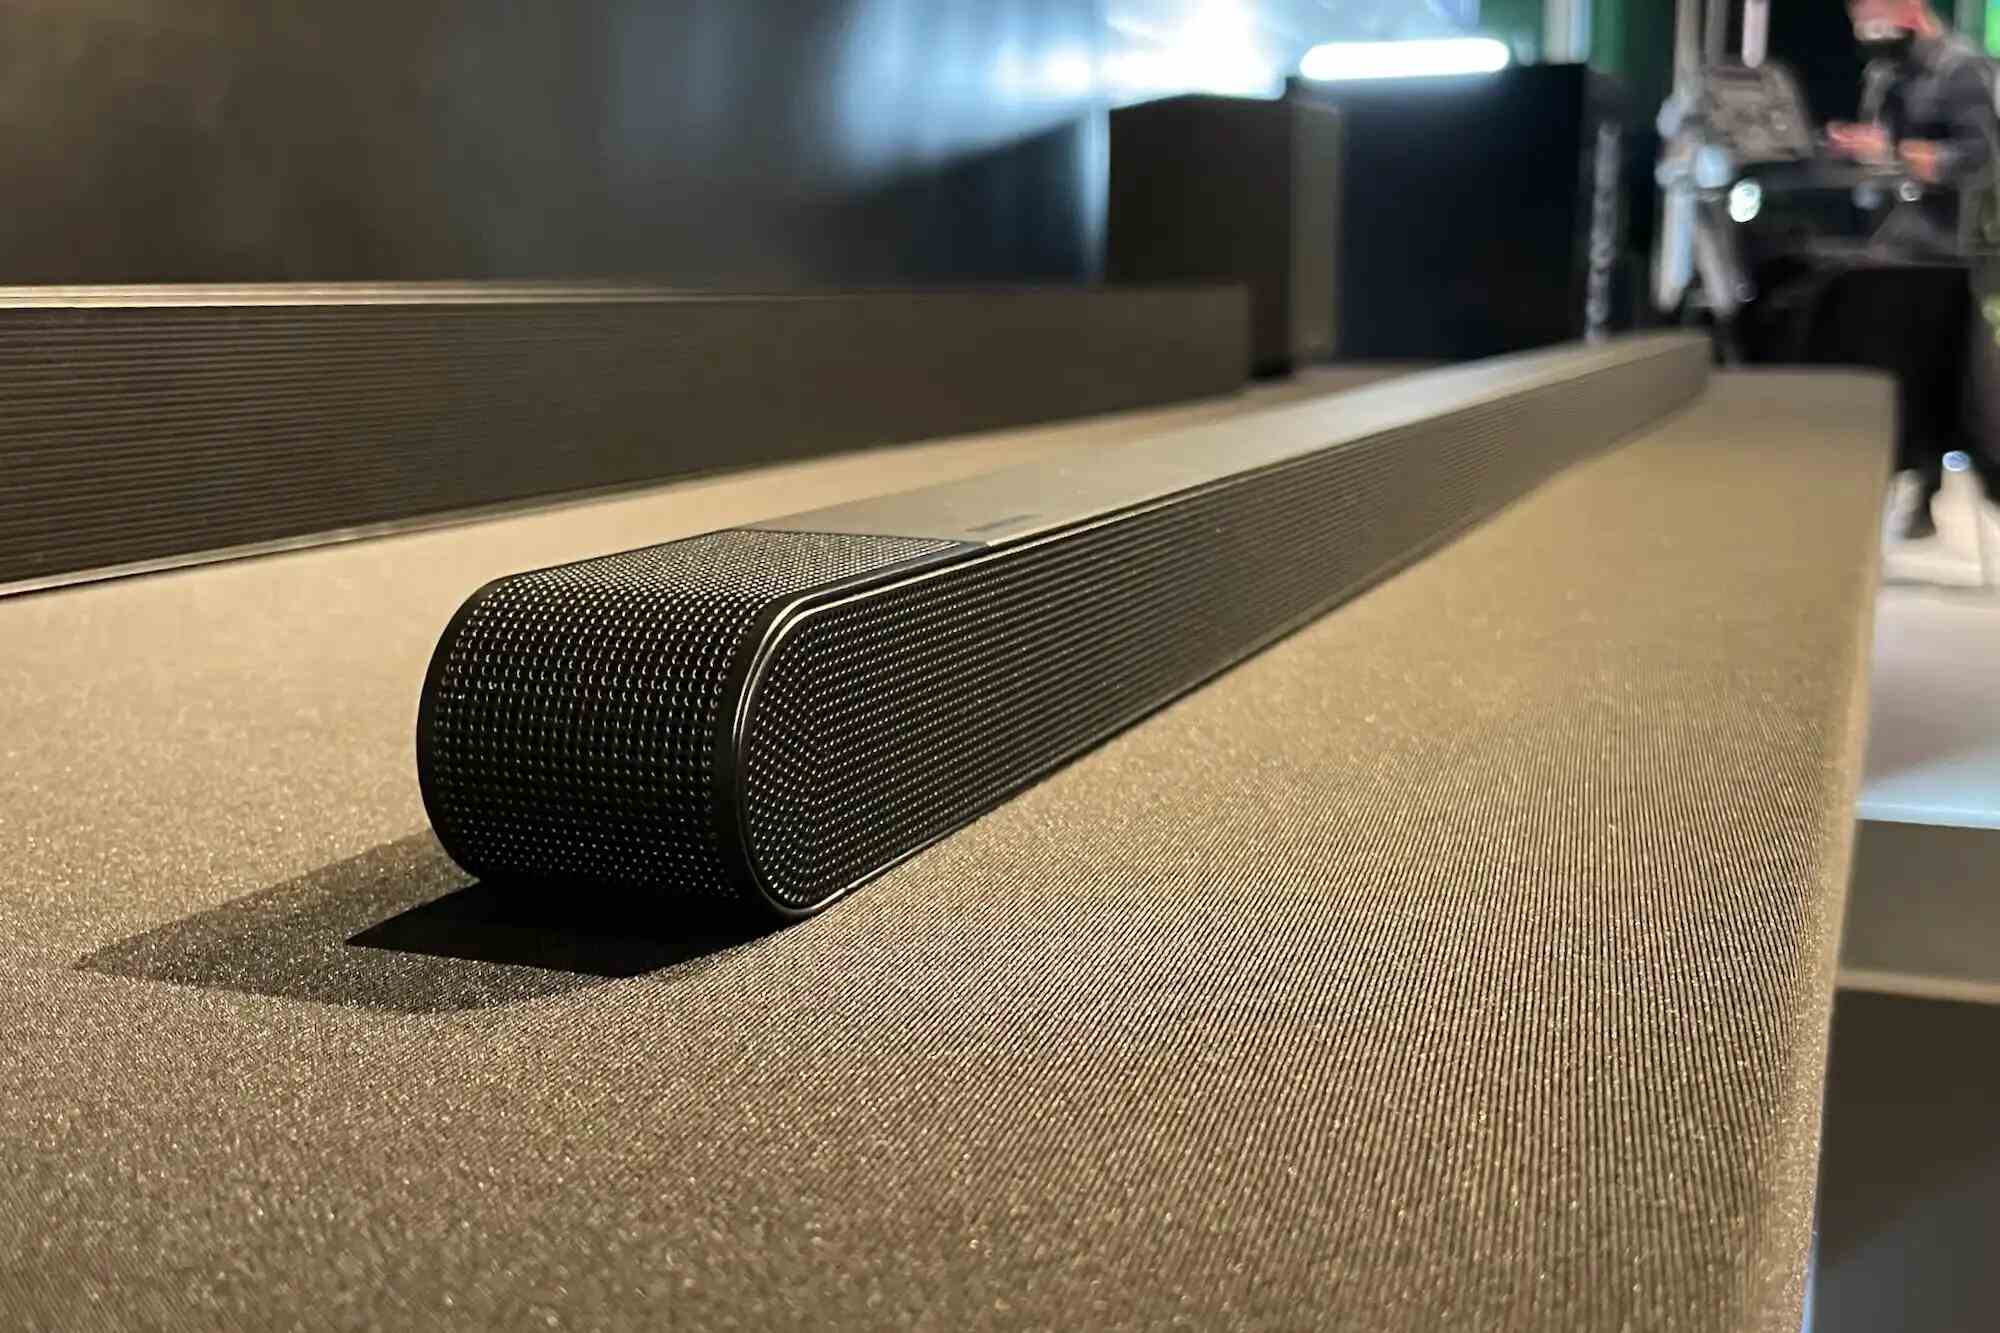 How To Pair A Samsung Soundbar Without A Remote